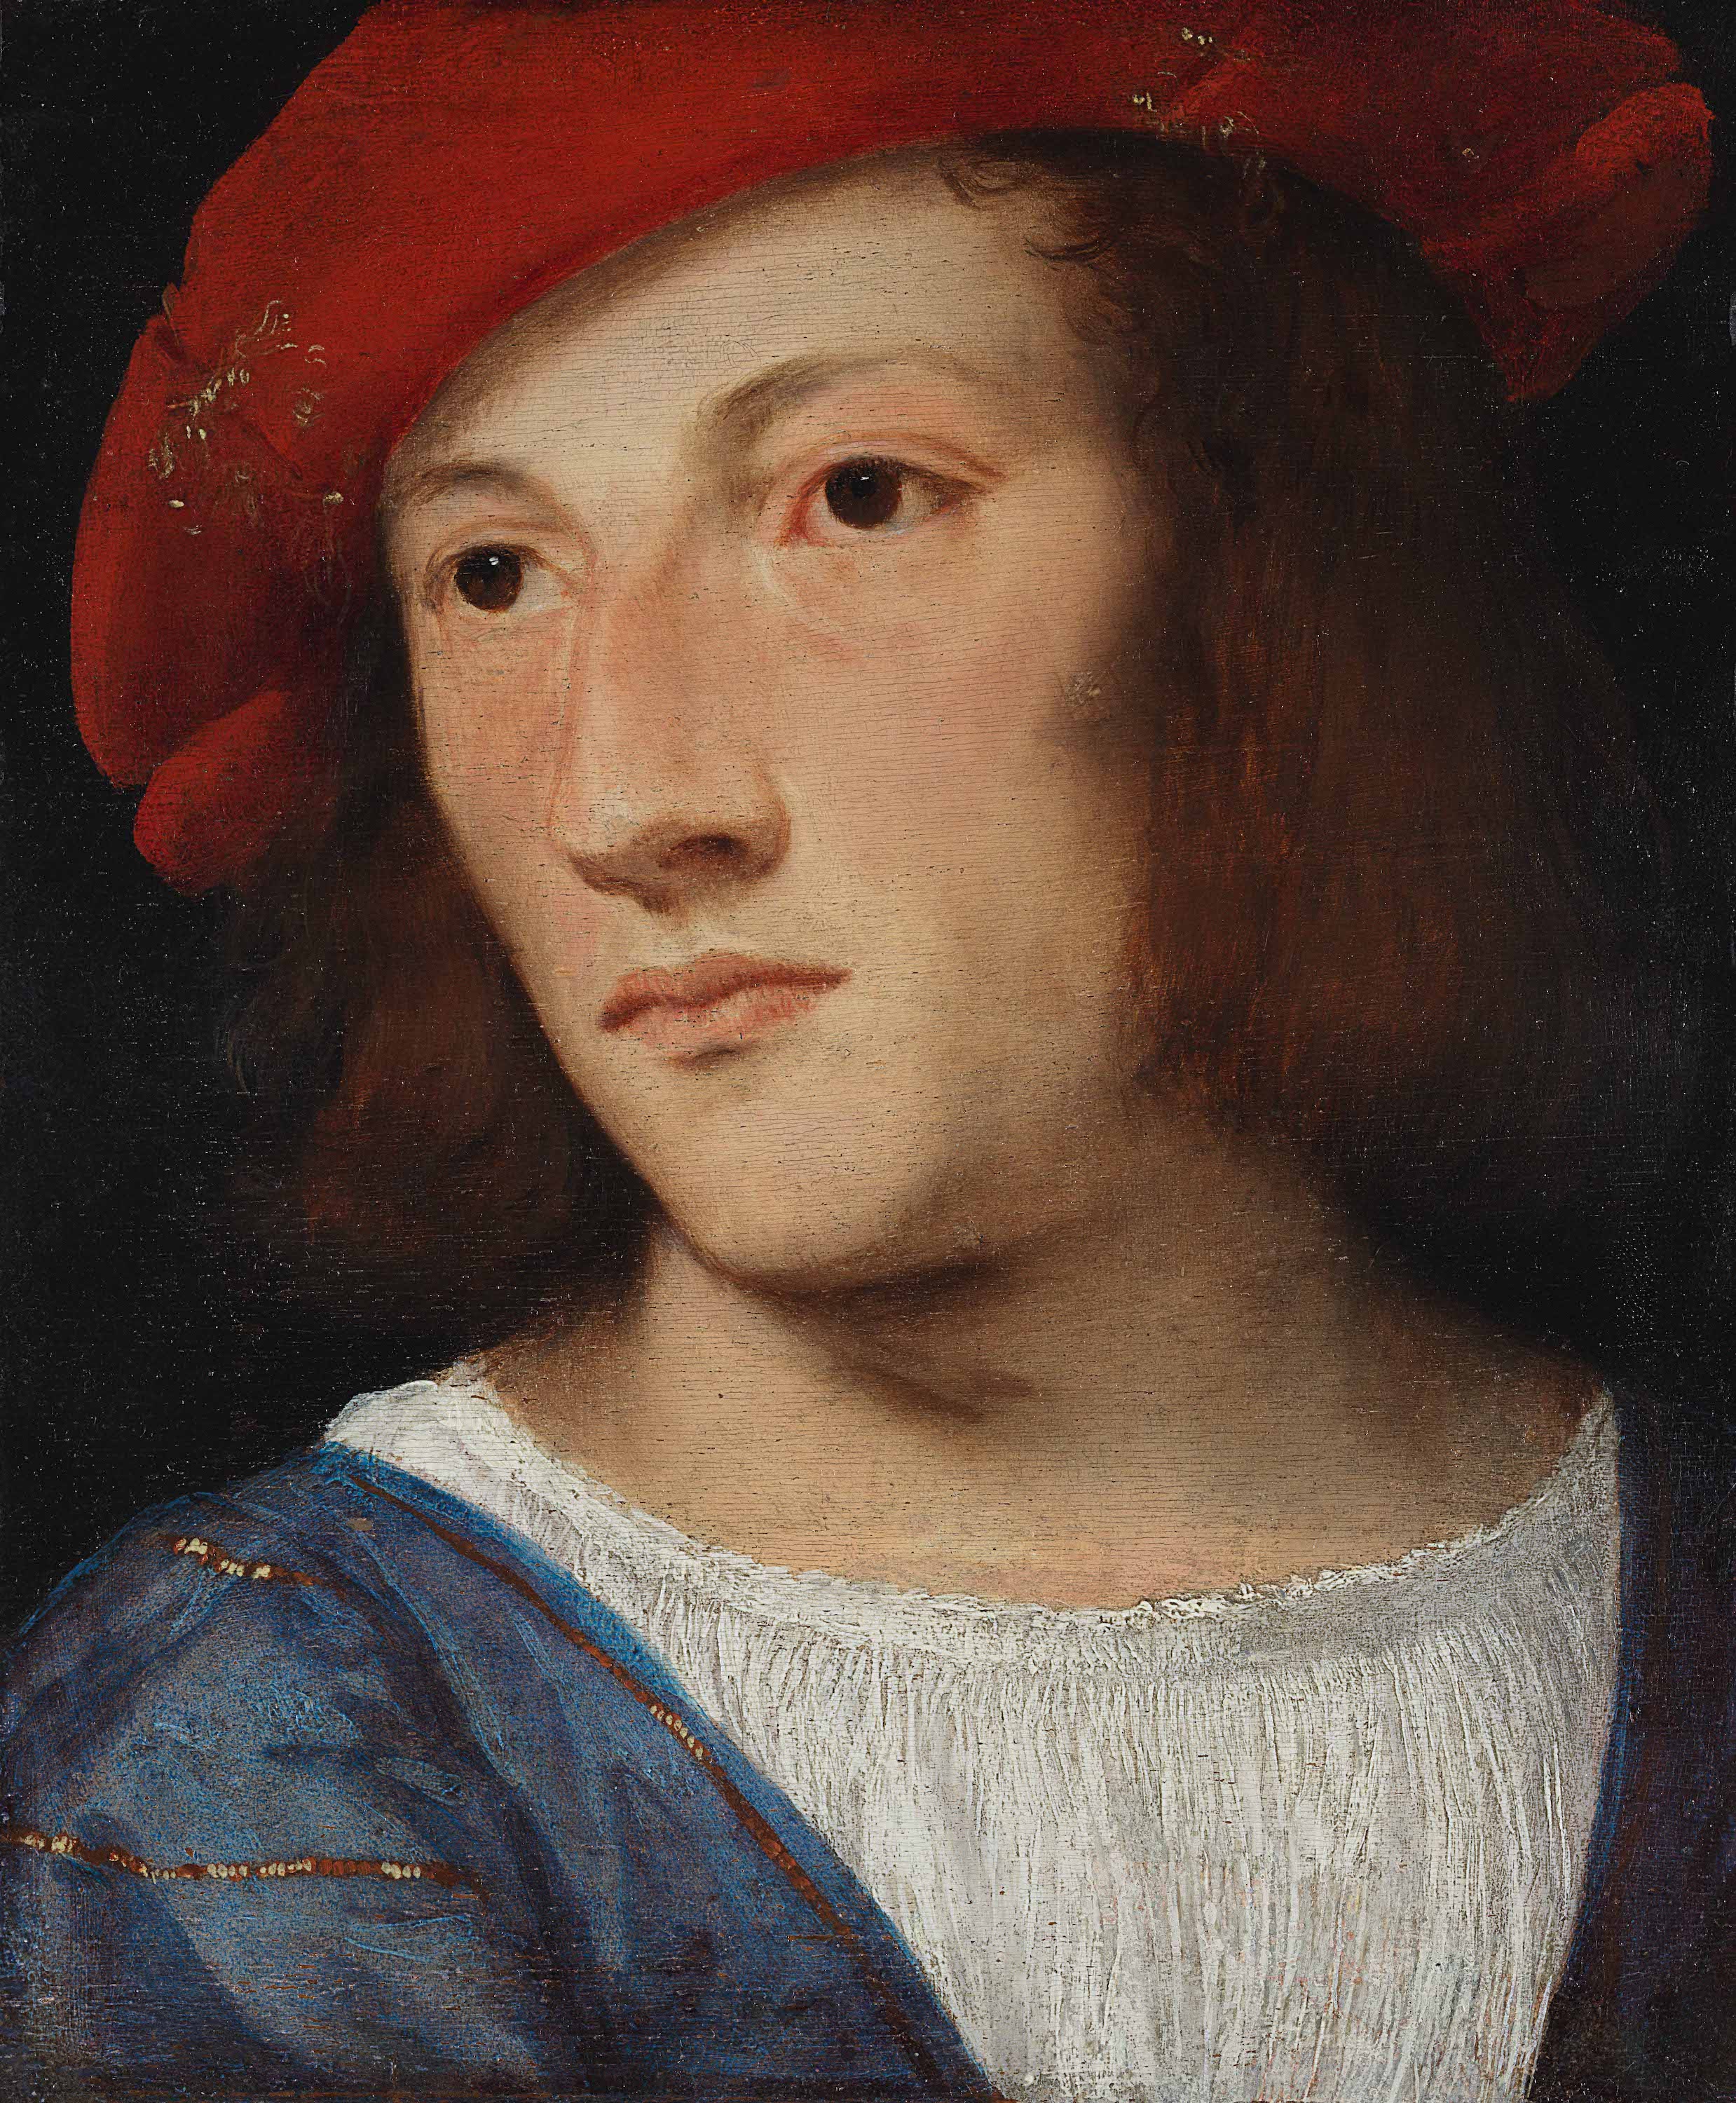 Portrait of a Young Man by  Titian - ca. 1510 - 20 x 17 cm Städel Museum